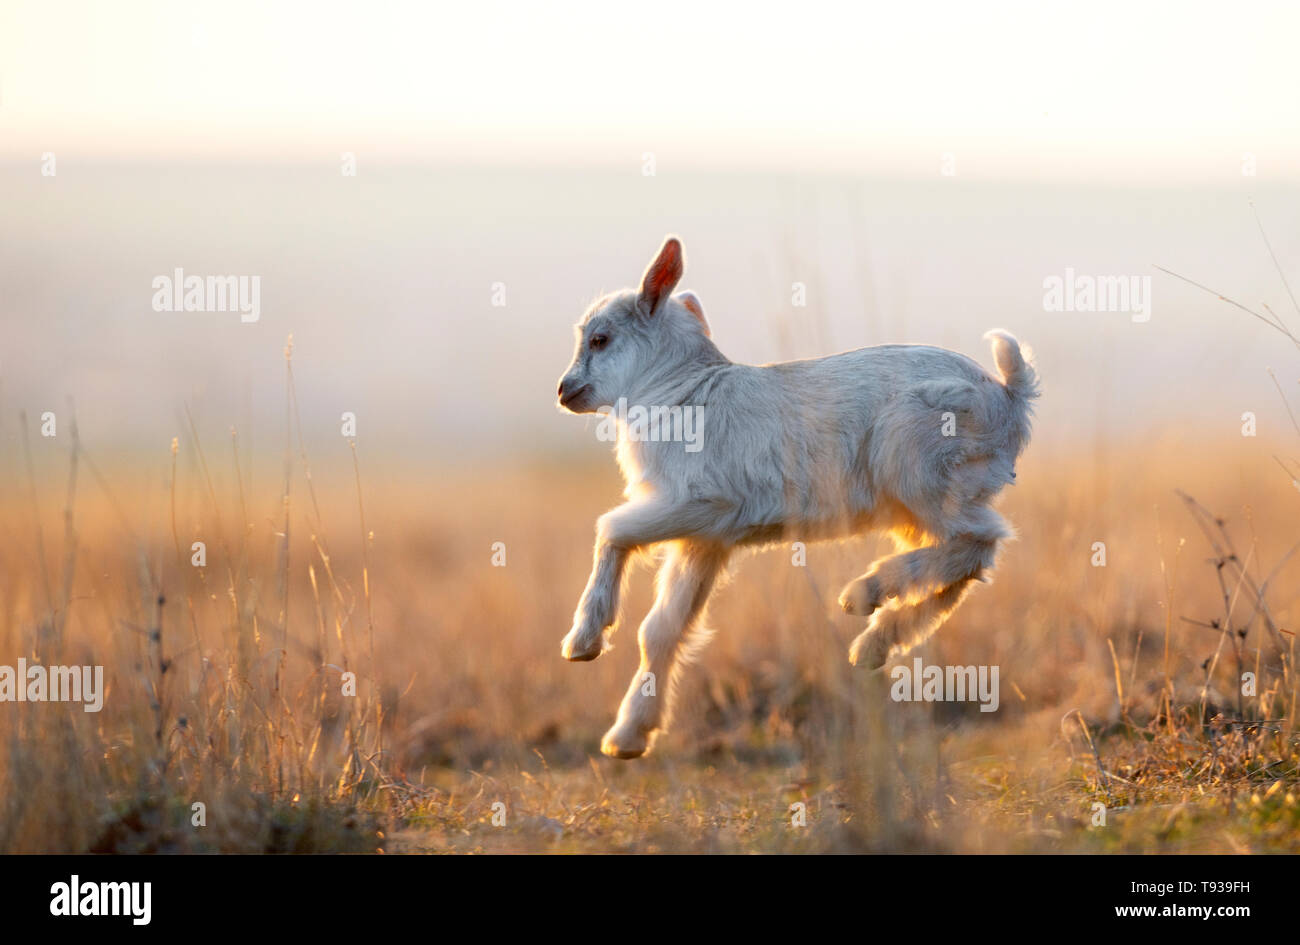 Cute yeanling running on field at sunset Stock Photo